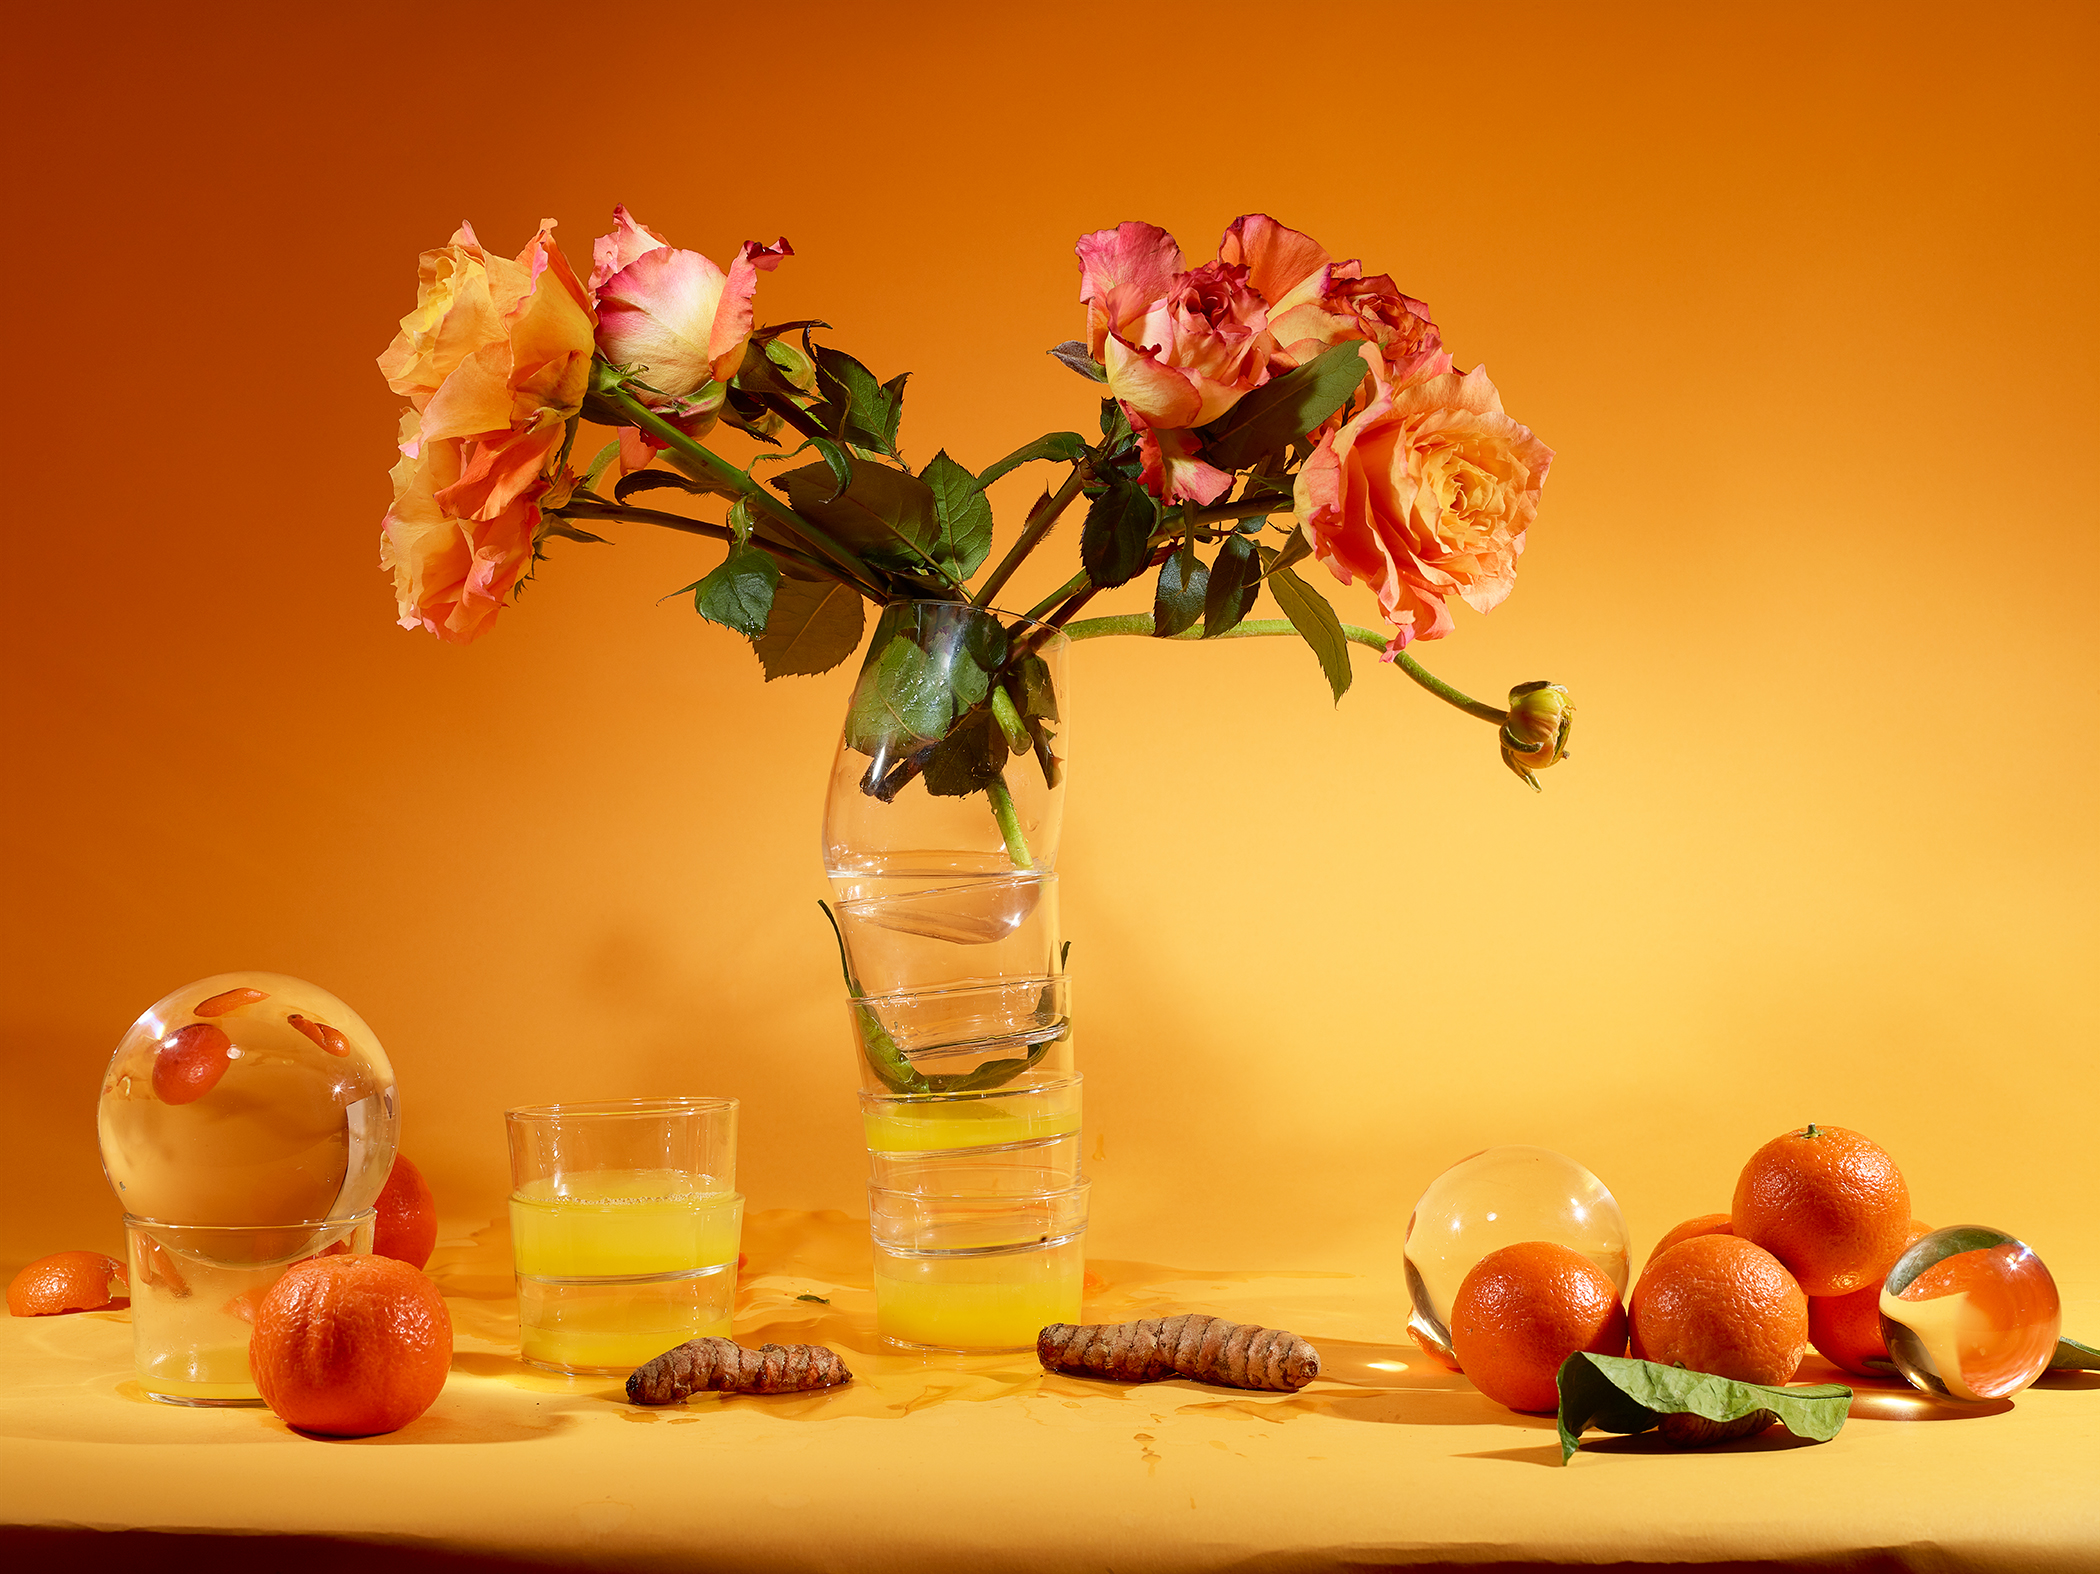 Featured image: The Six, 2020 by Marzena Abrahamik. A photograph of a still life of a orange and red bouquet of flowers on an orange-yellow table. On the table also sits oranges and various plant parts. The background dis also orange-yellow. Image courtesy of the artist.